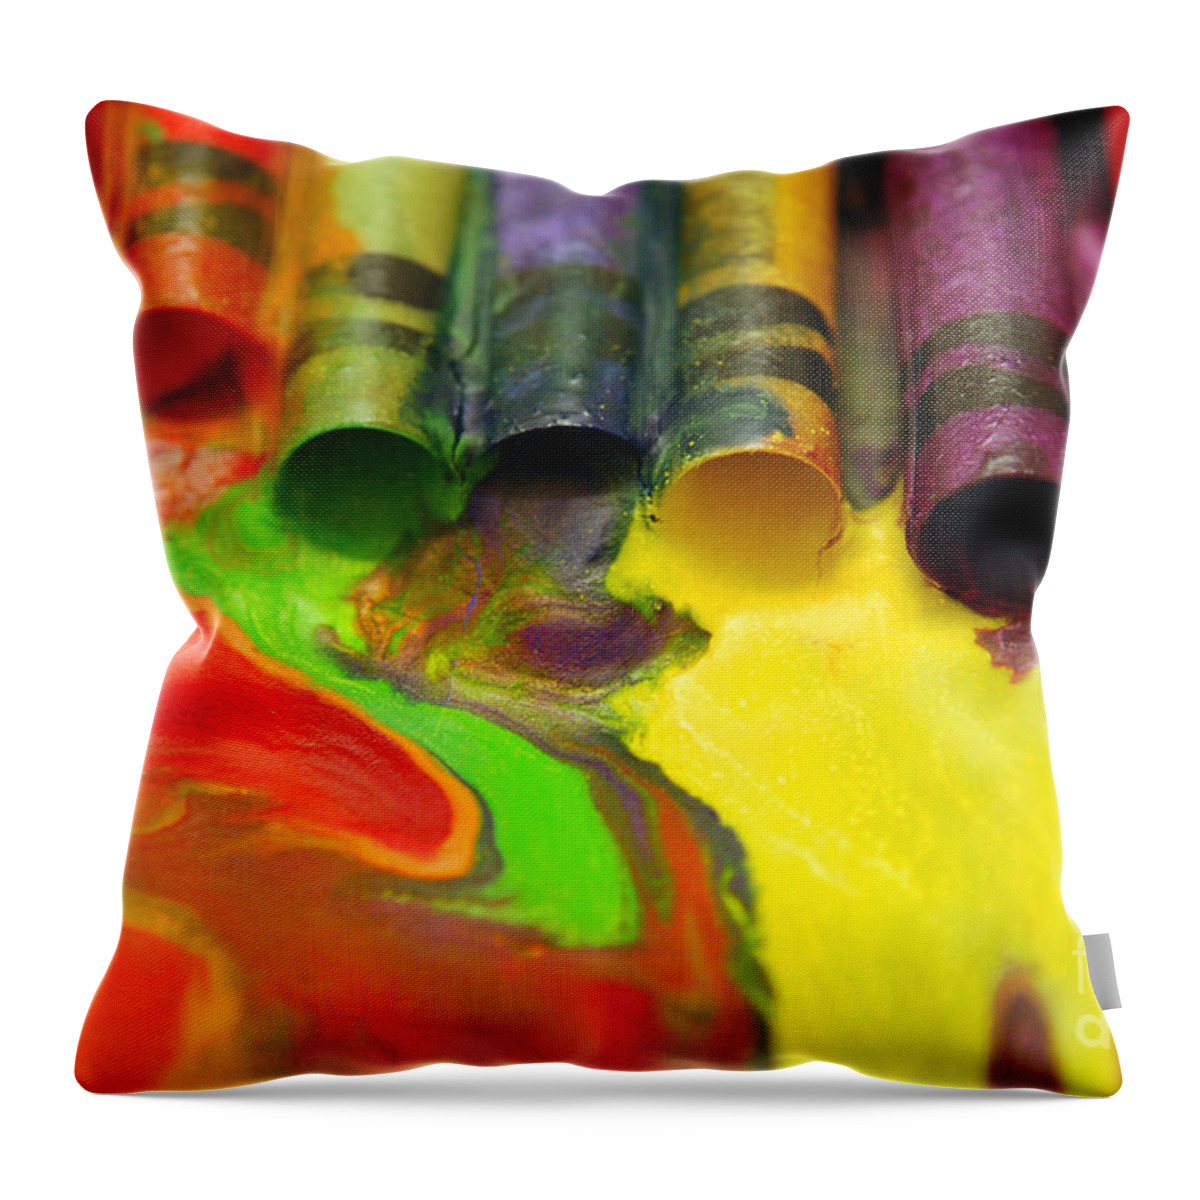 Hotel Art Throw Pillow featuring the digital art Crayon Cooperation by Margie Chapman